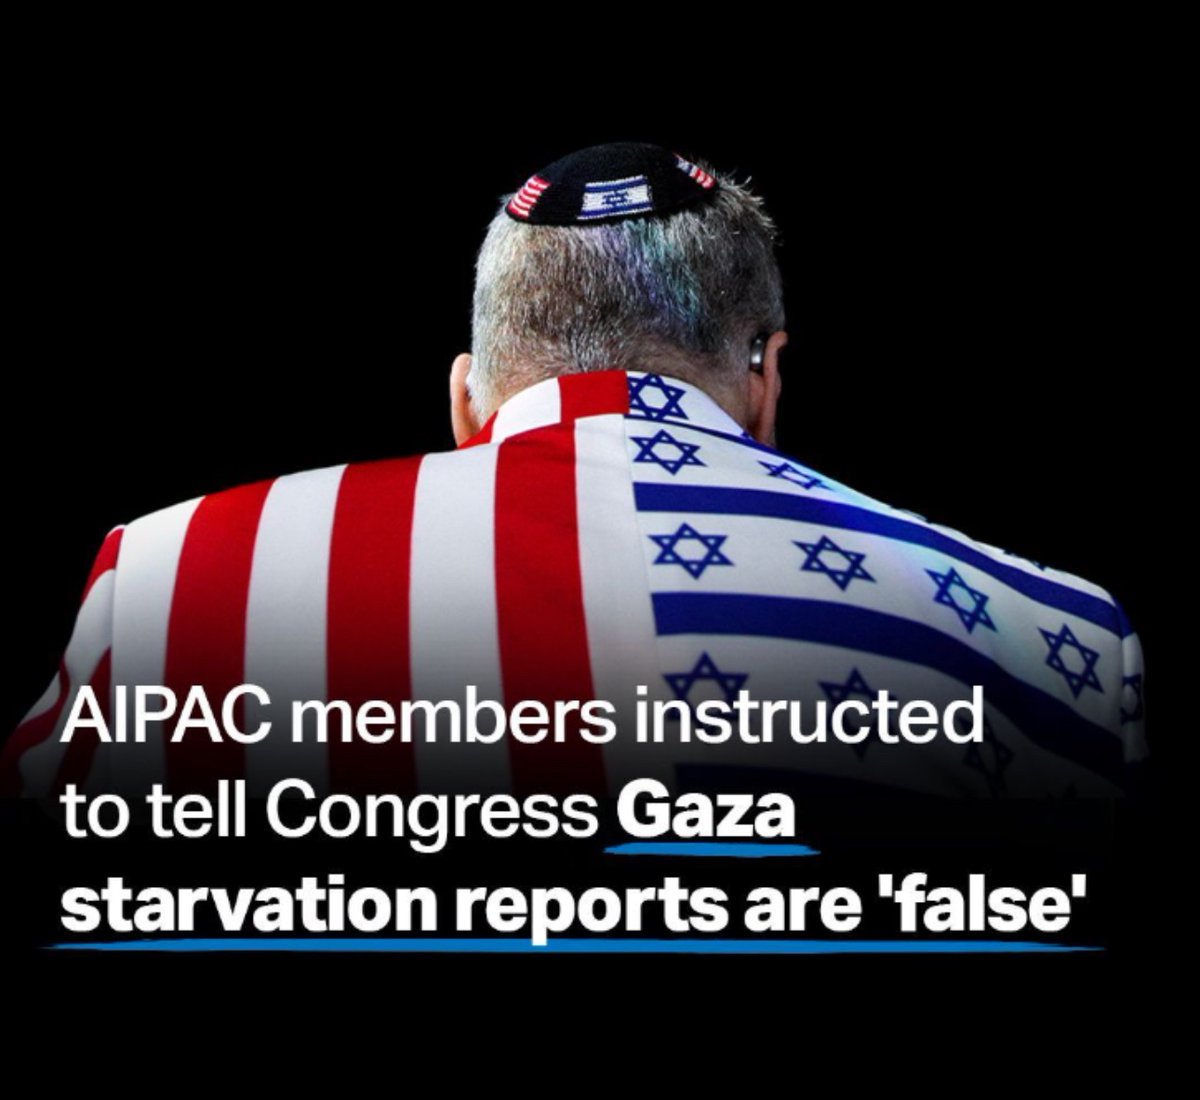 AIPAC ORDERED CONGRESS TO SAY THIS:

“Reports that people are starving in Gaza are false”
“Israel is not blocking the delivery of aid to Gaza”
“The United States must not fall into Hamas trap”